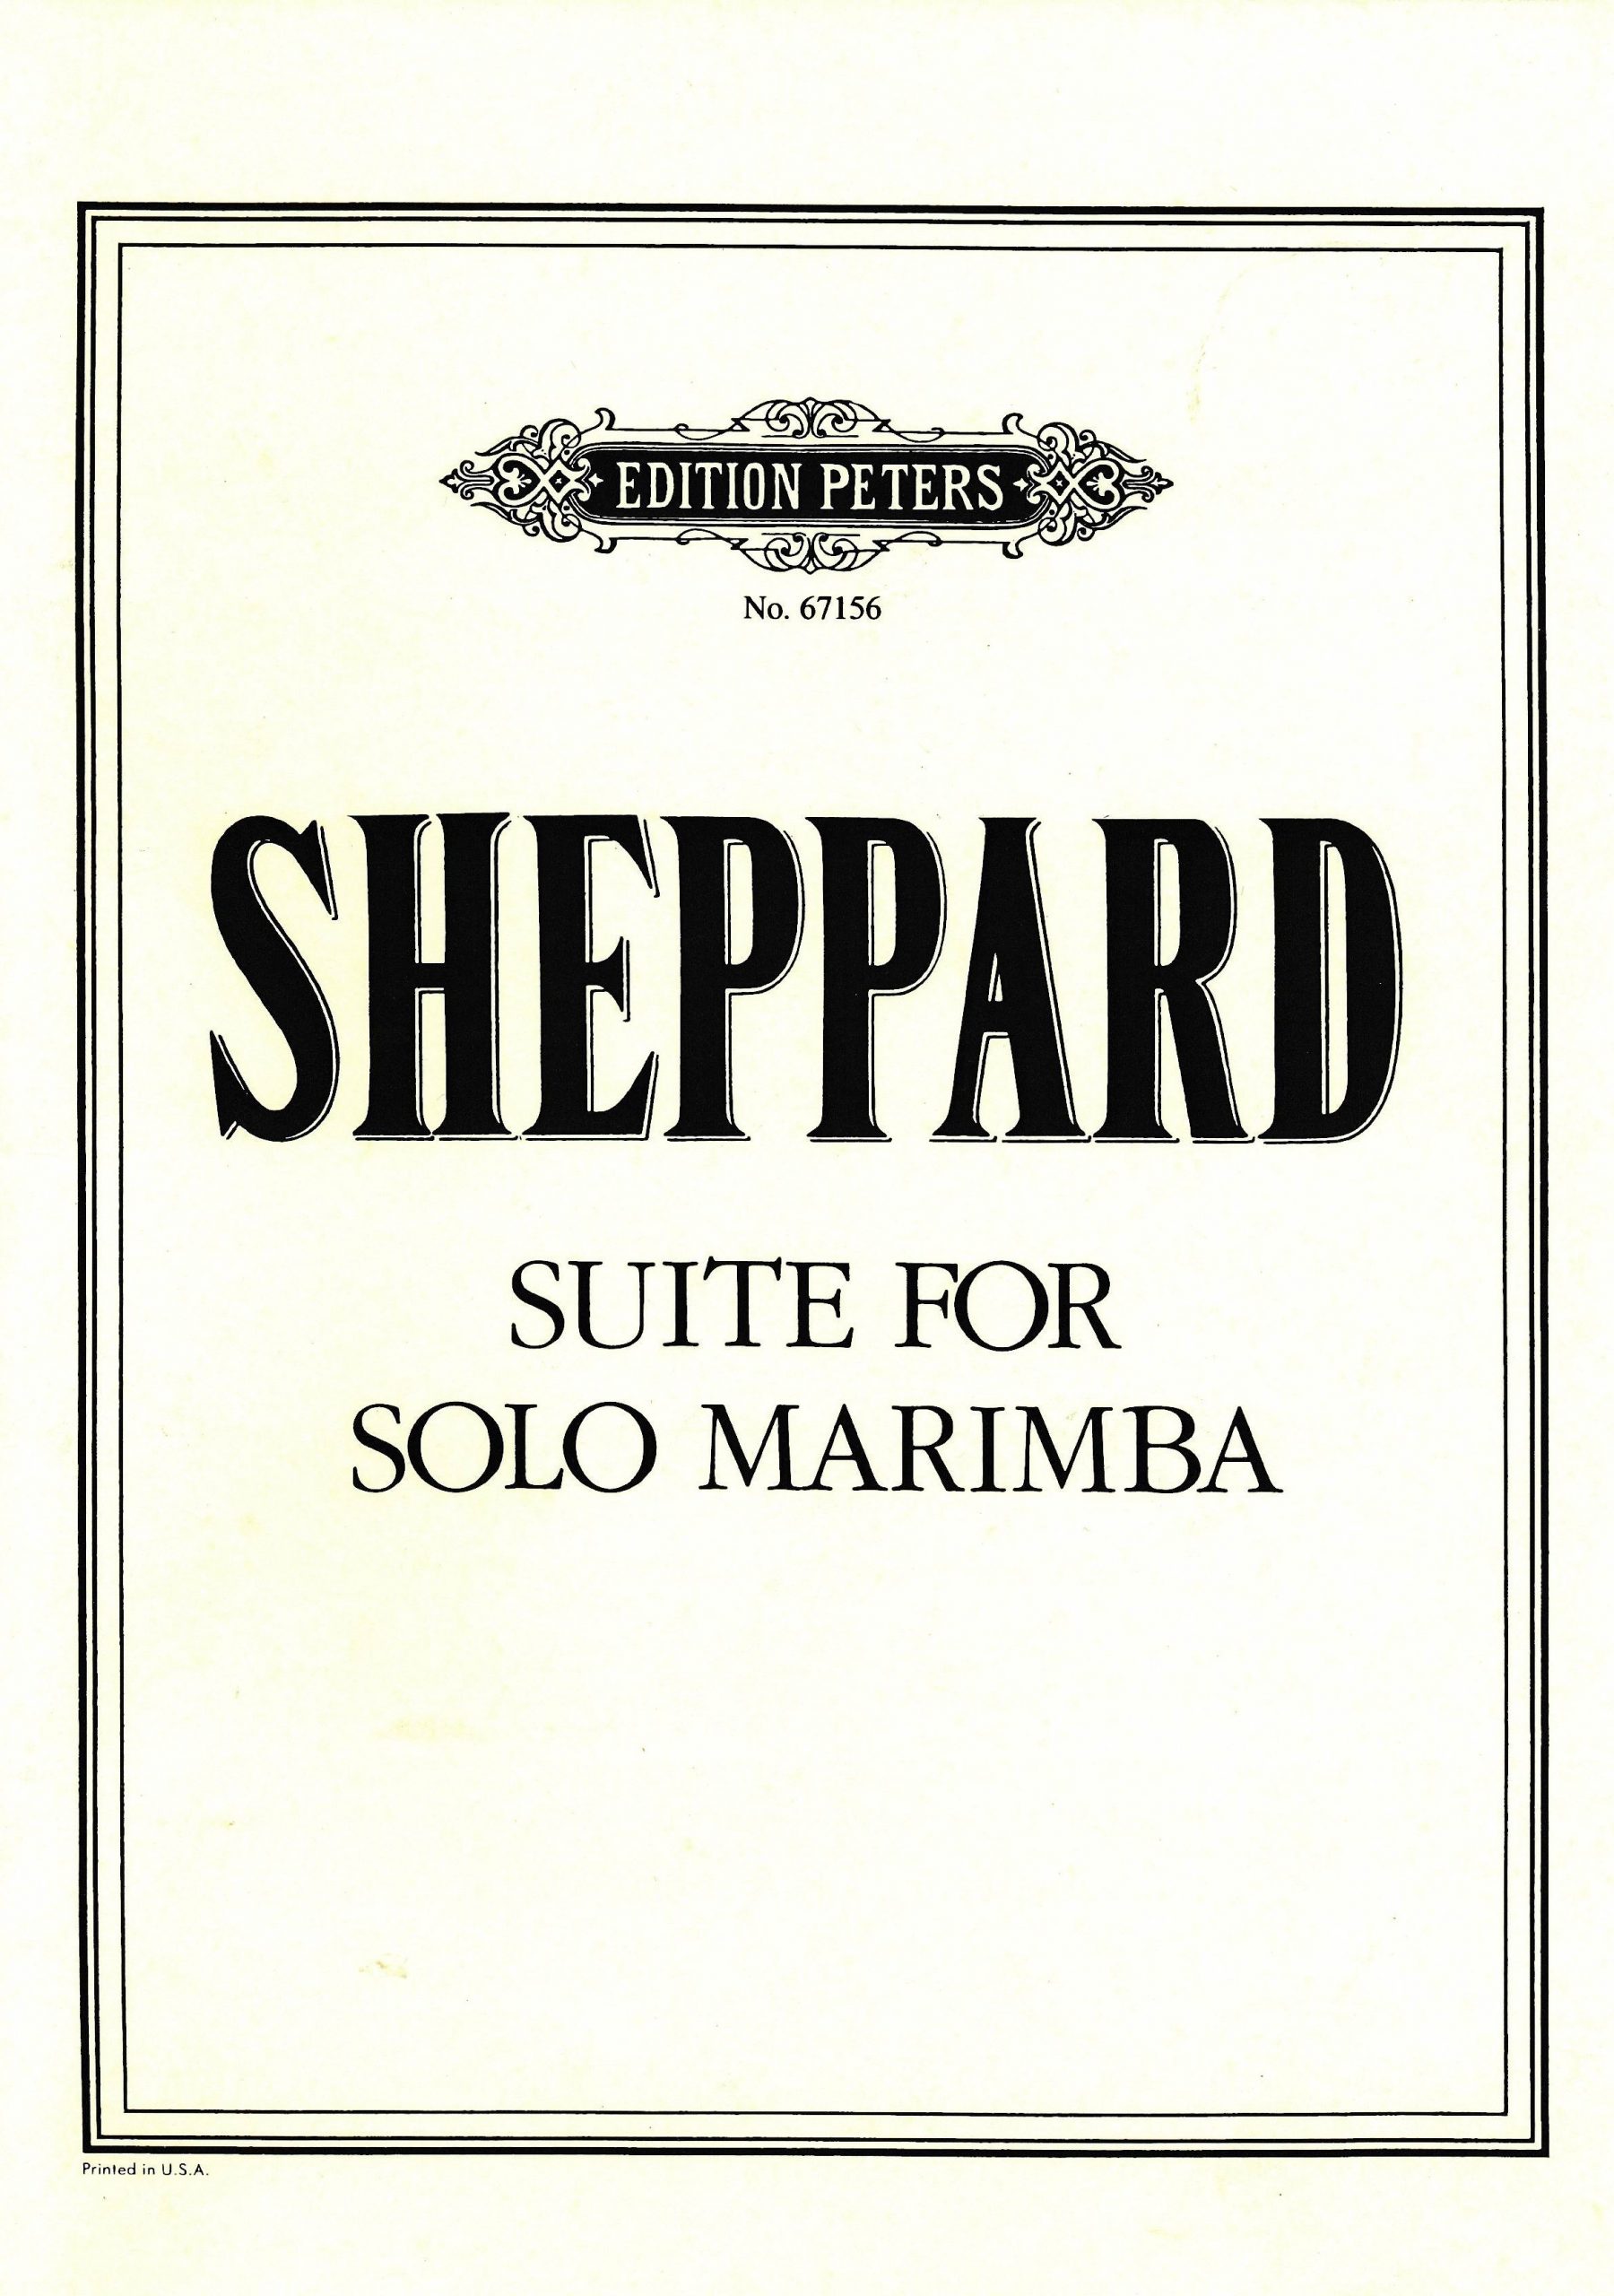 Suite for Solo Marimba by Suzanne Sheppard